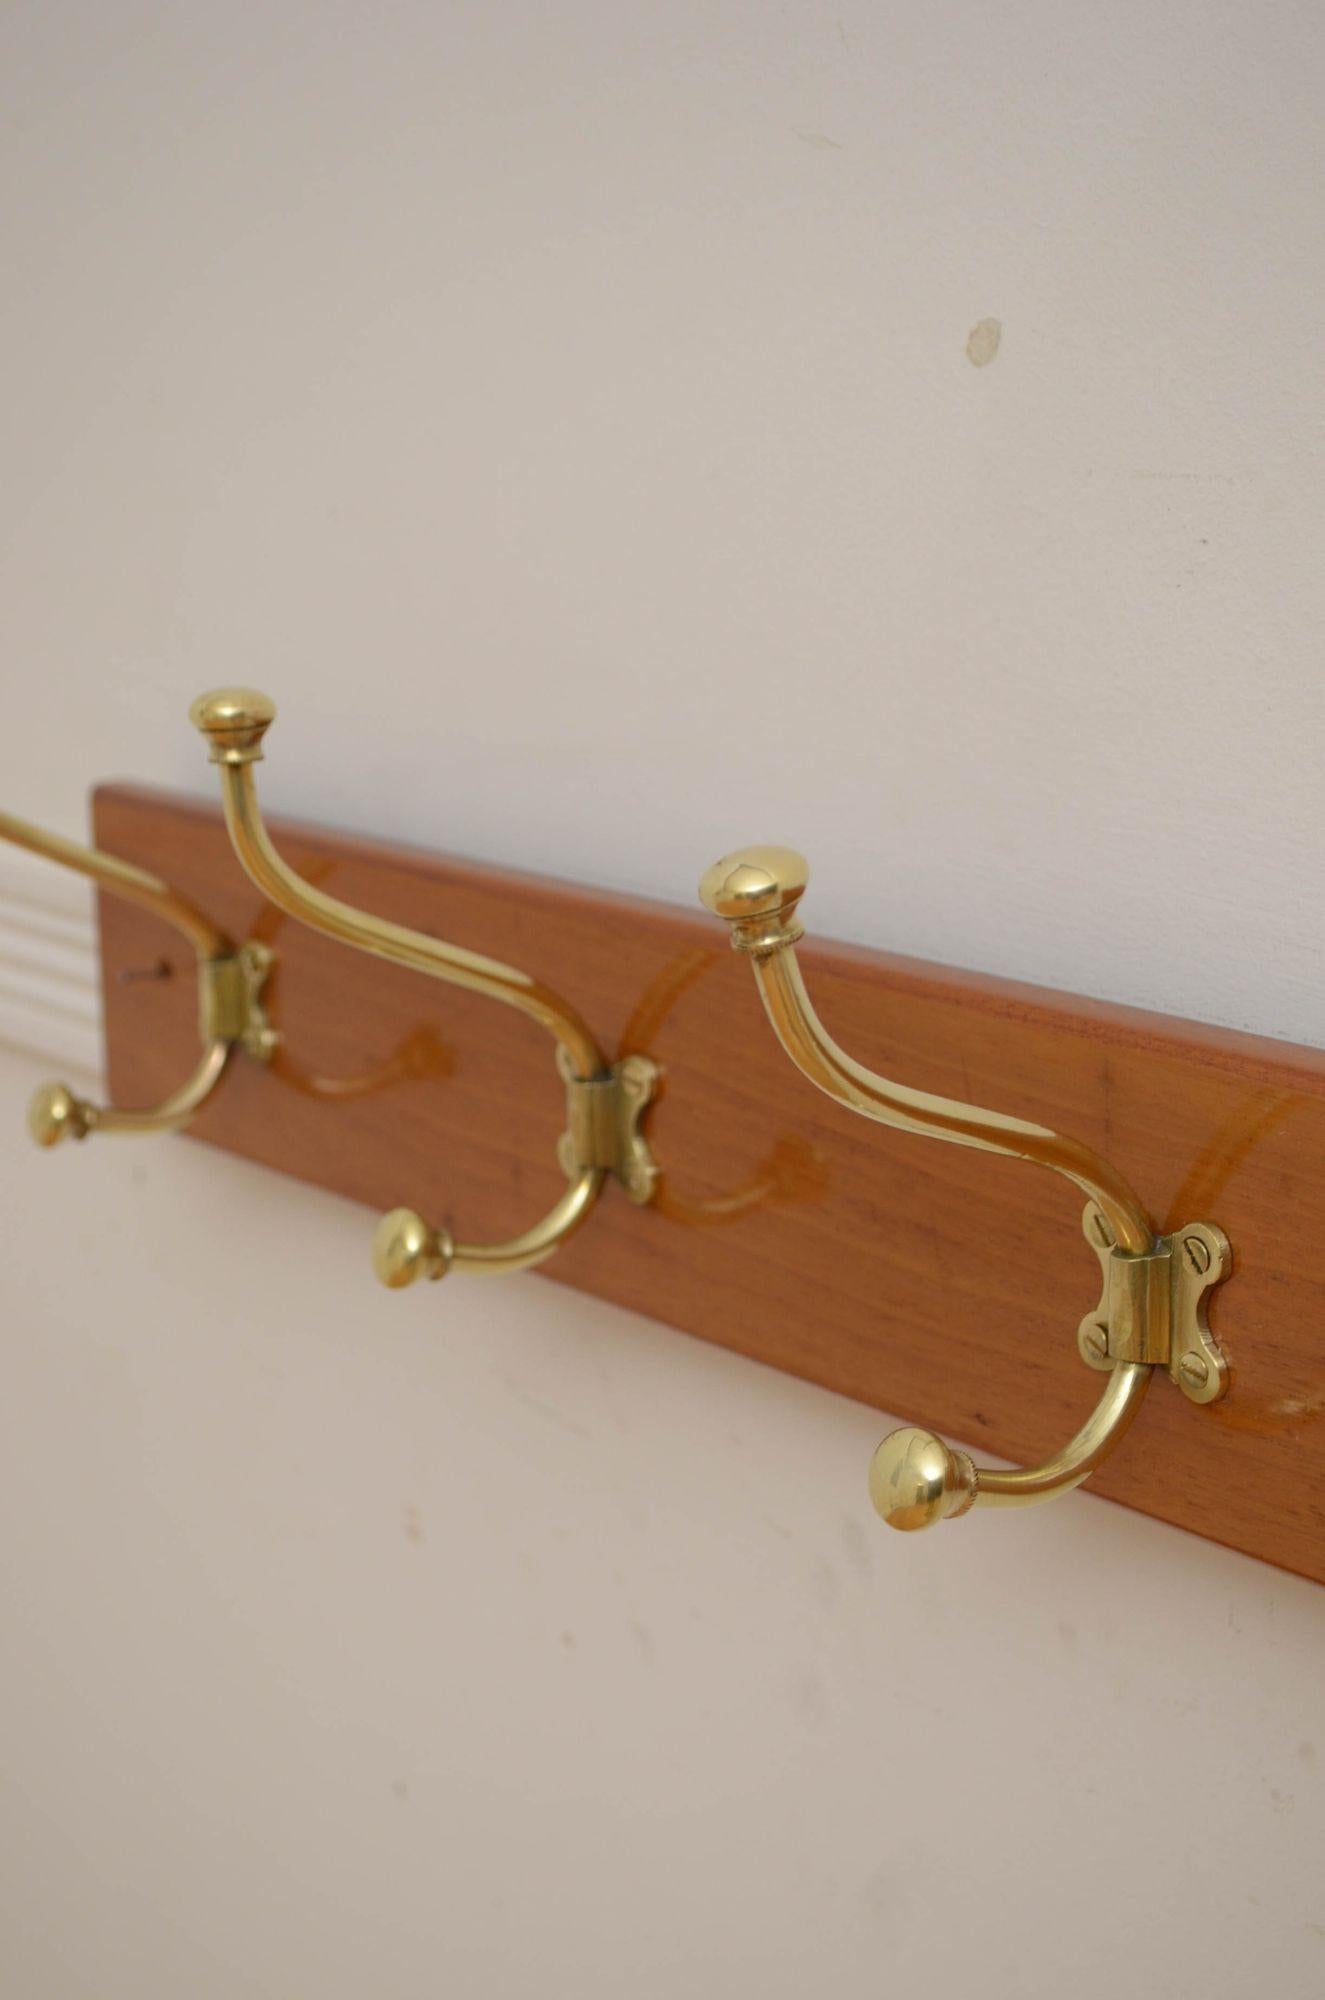 Victorian Coat Rack In Good Condition For Sale In Whaley Bridge, GB